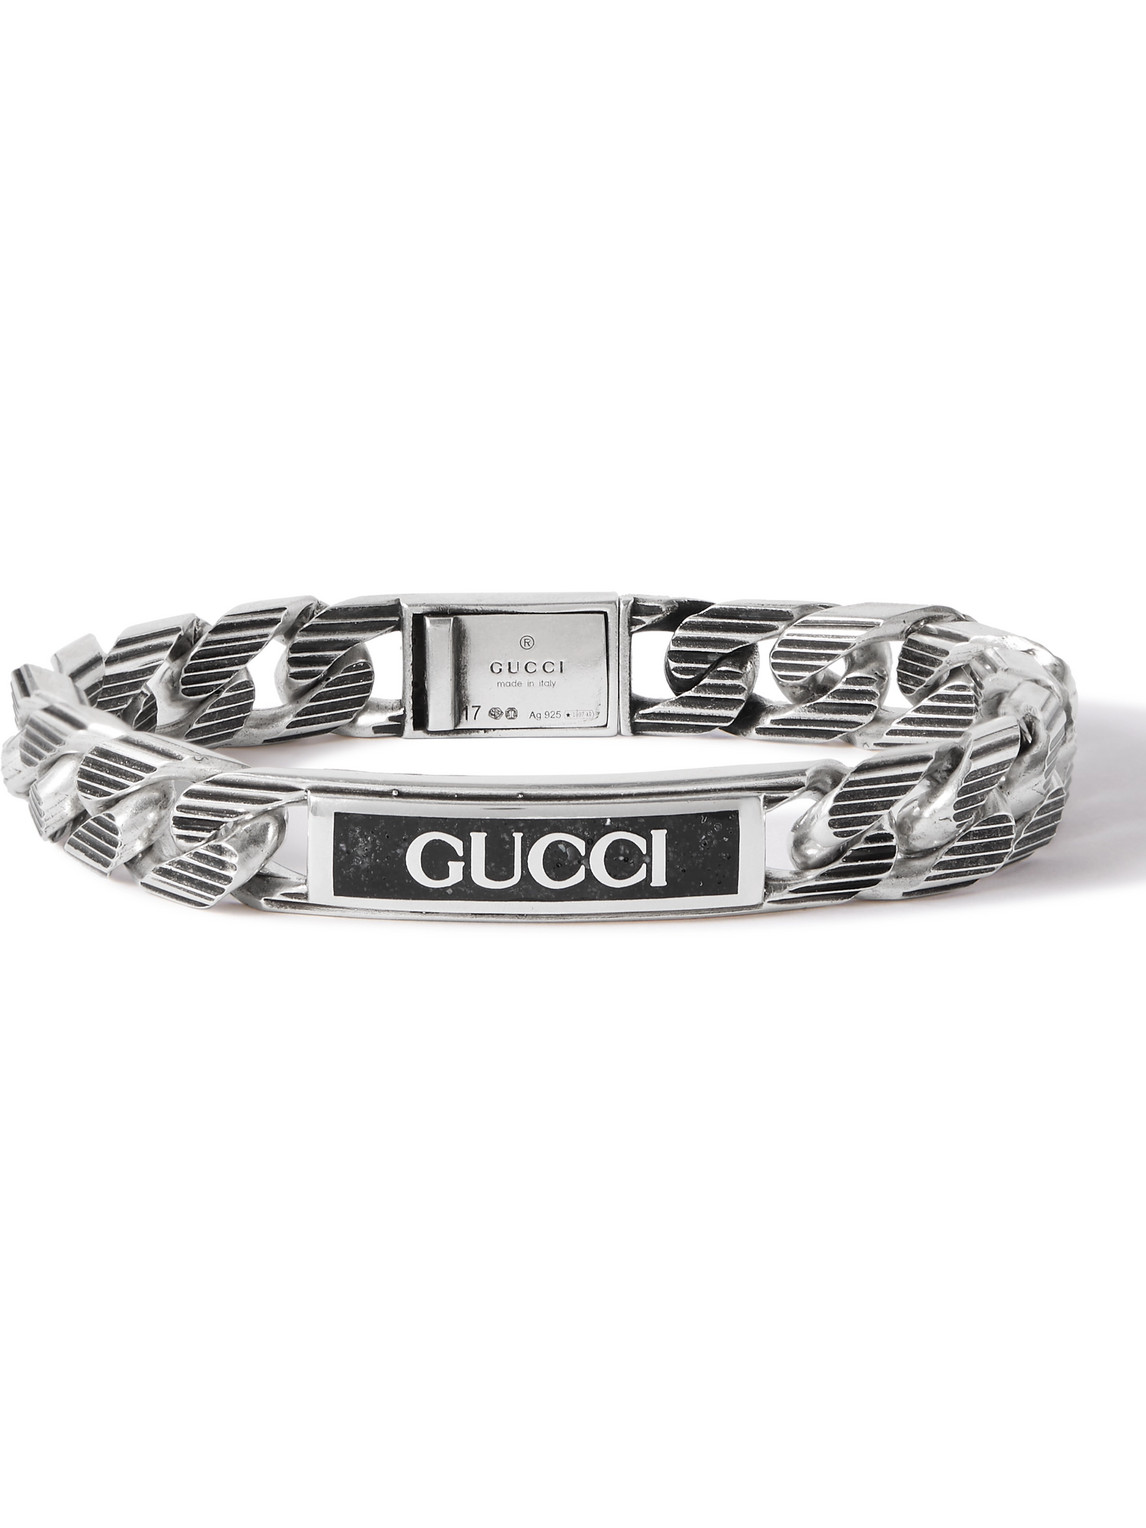 GUCCI STERLING SILVER AND ENAMEL CHAIN BRACELET